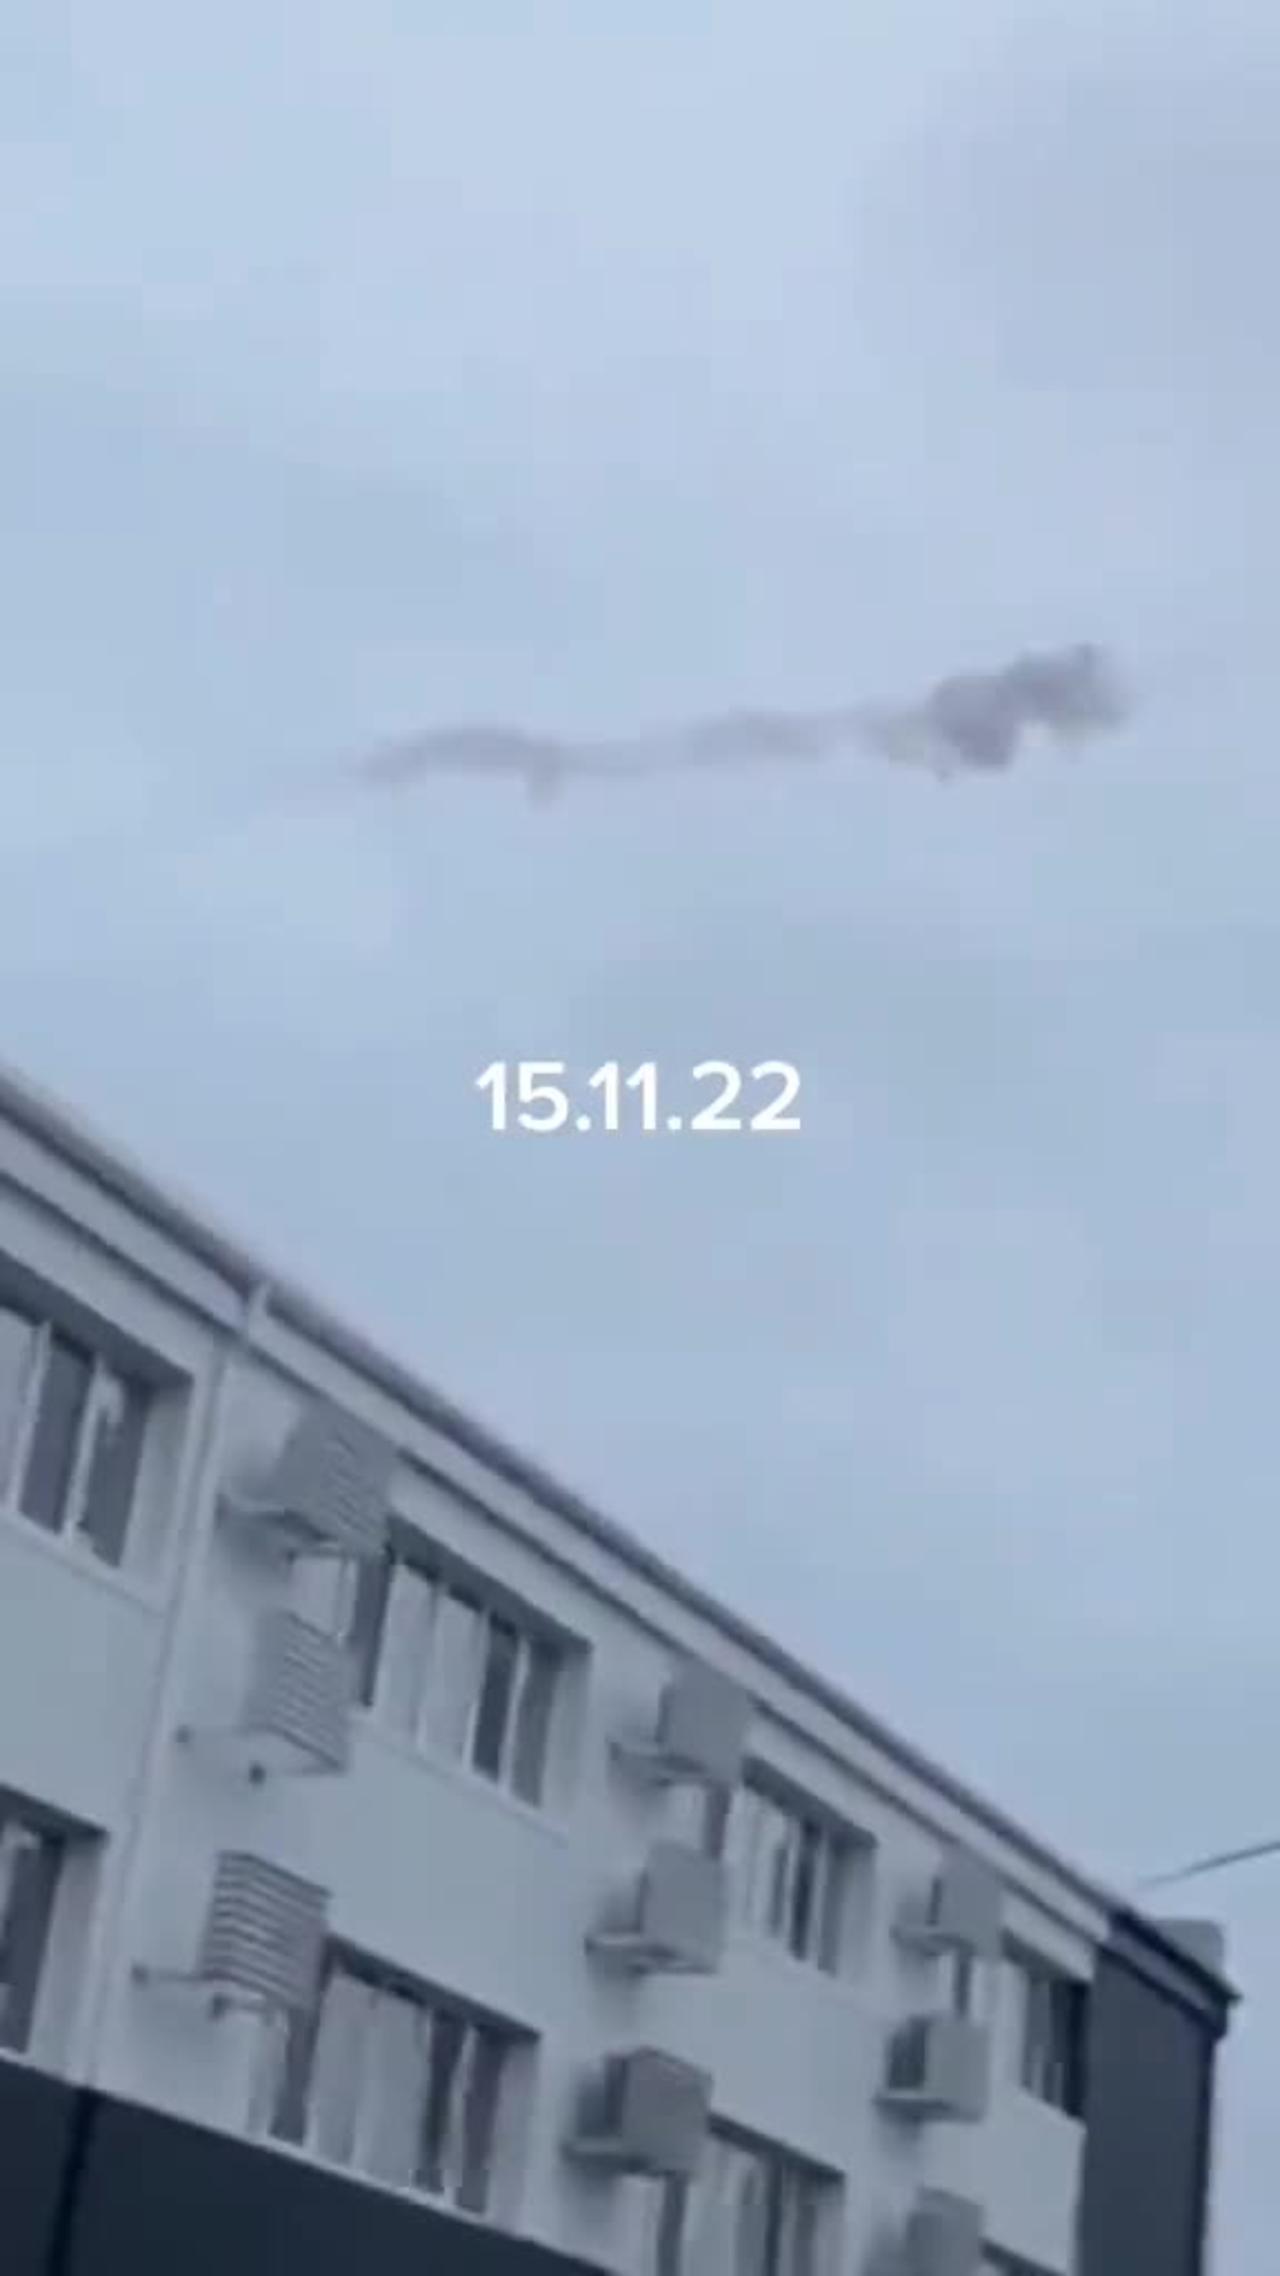 Russian Cruise Missile Intercepted